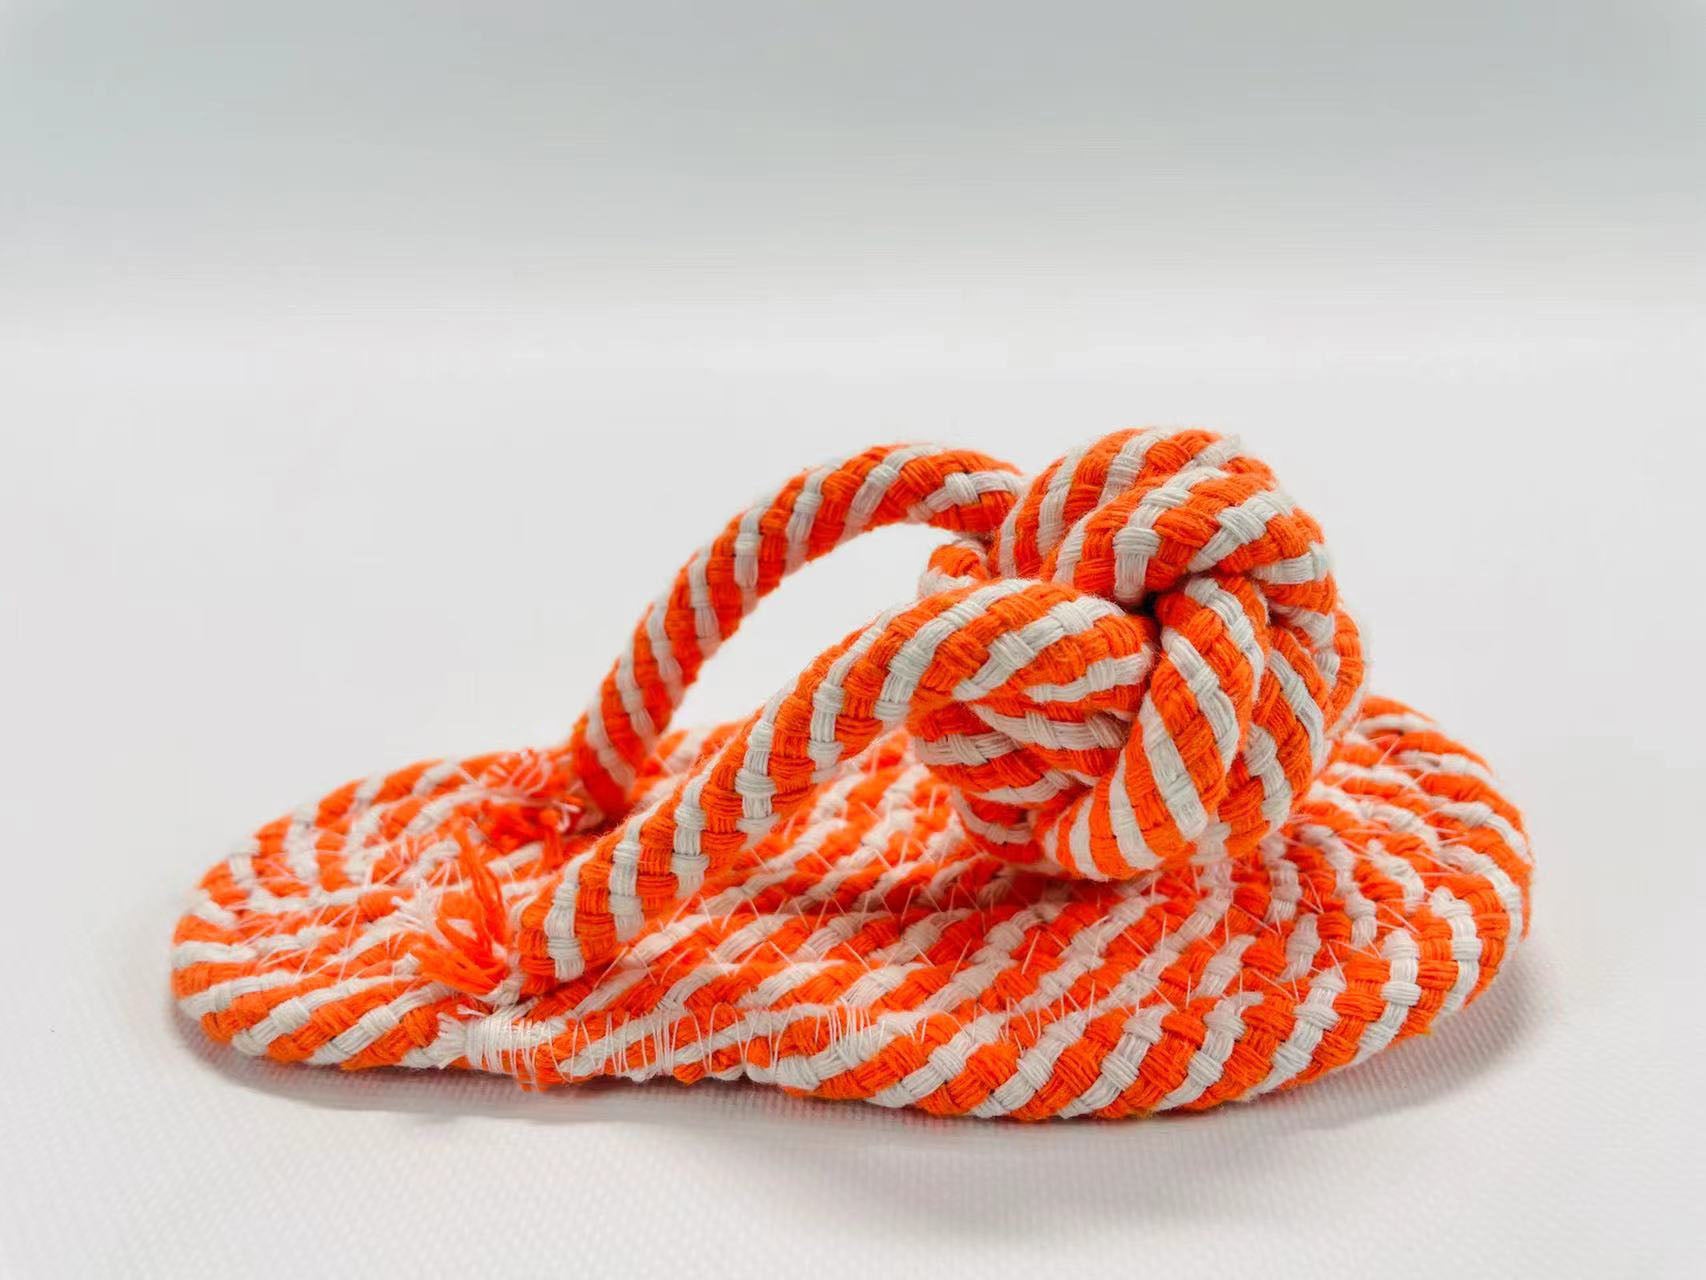 Soft cotton rope woven pet toy for playtime. Ideal for your furry friends! Comfy and fun.